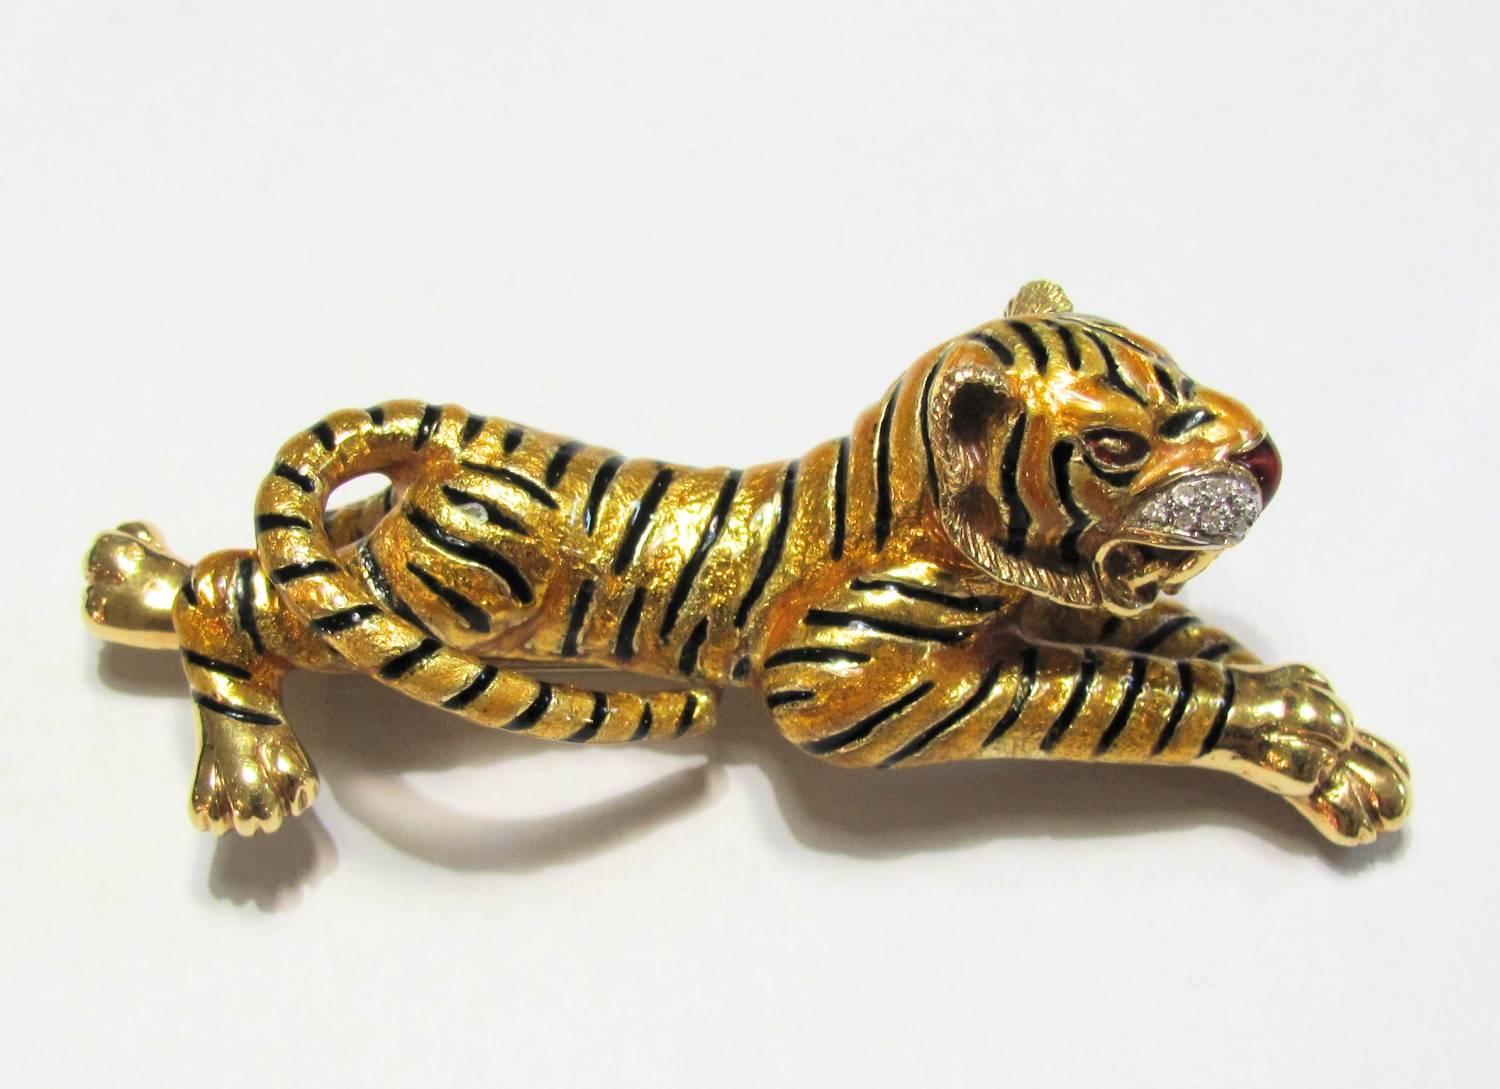 Fantastic '60 Frascarolo tiger brooche with yellow and black enamel for the body of the tiger and red enamel for the nose. Diamonds for the mustache. 